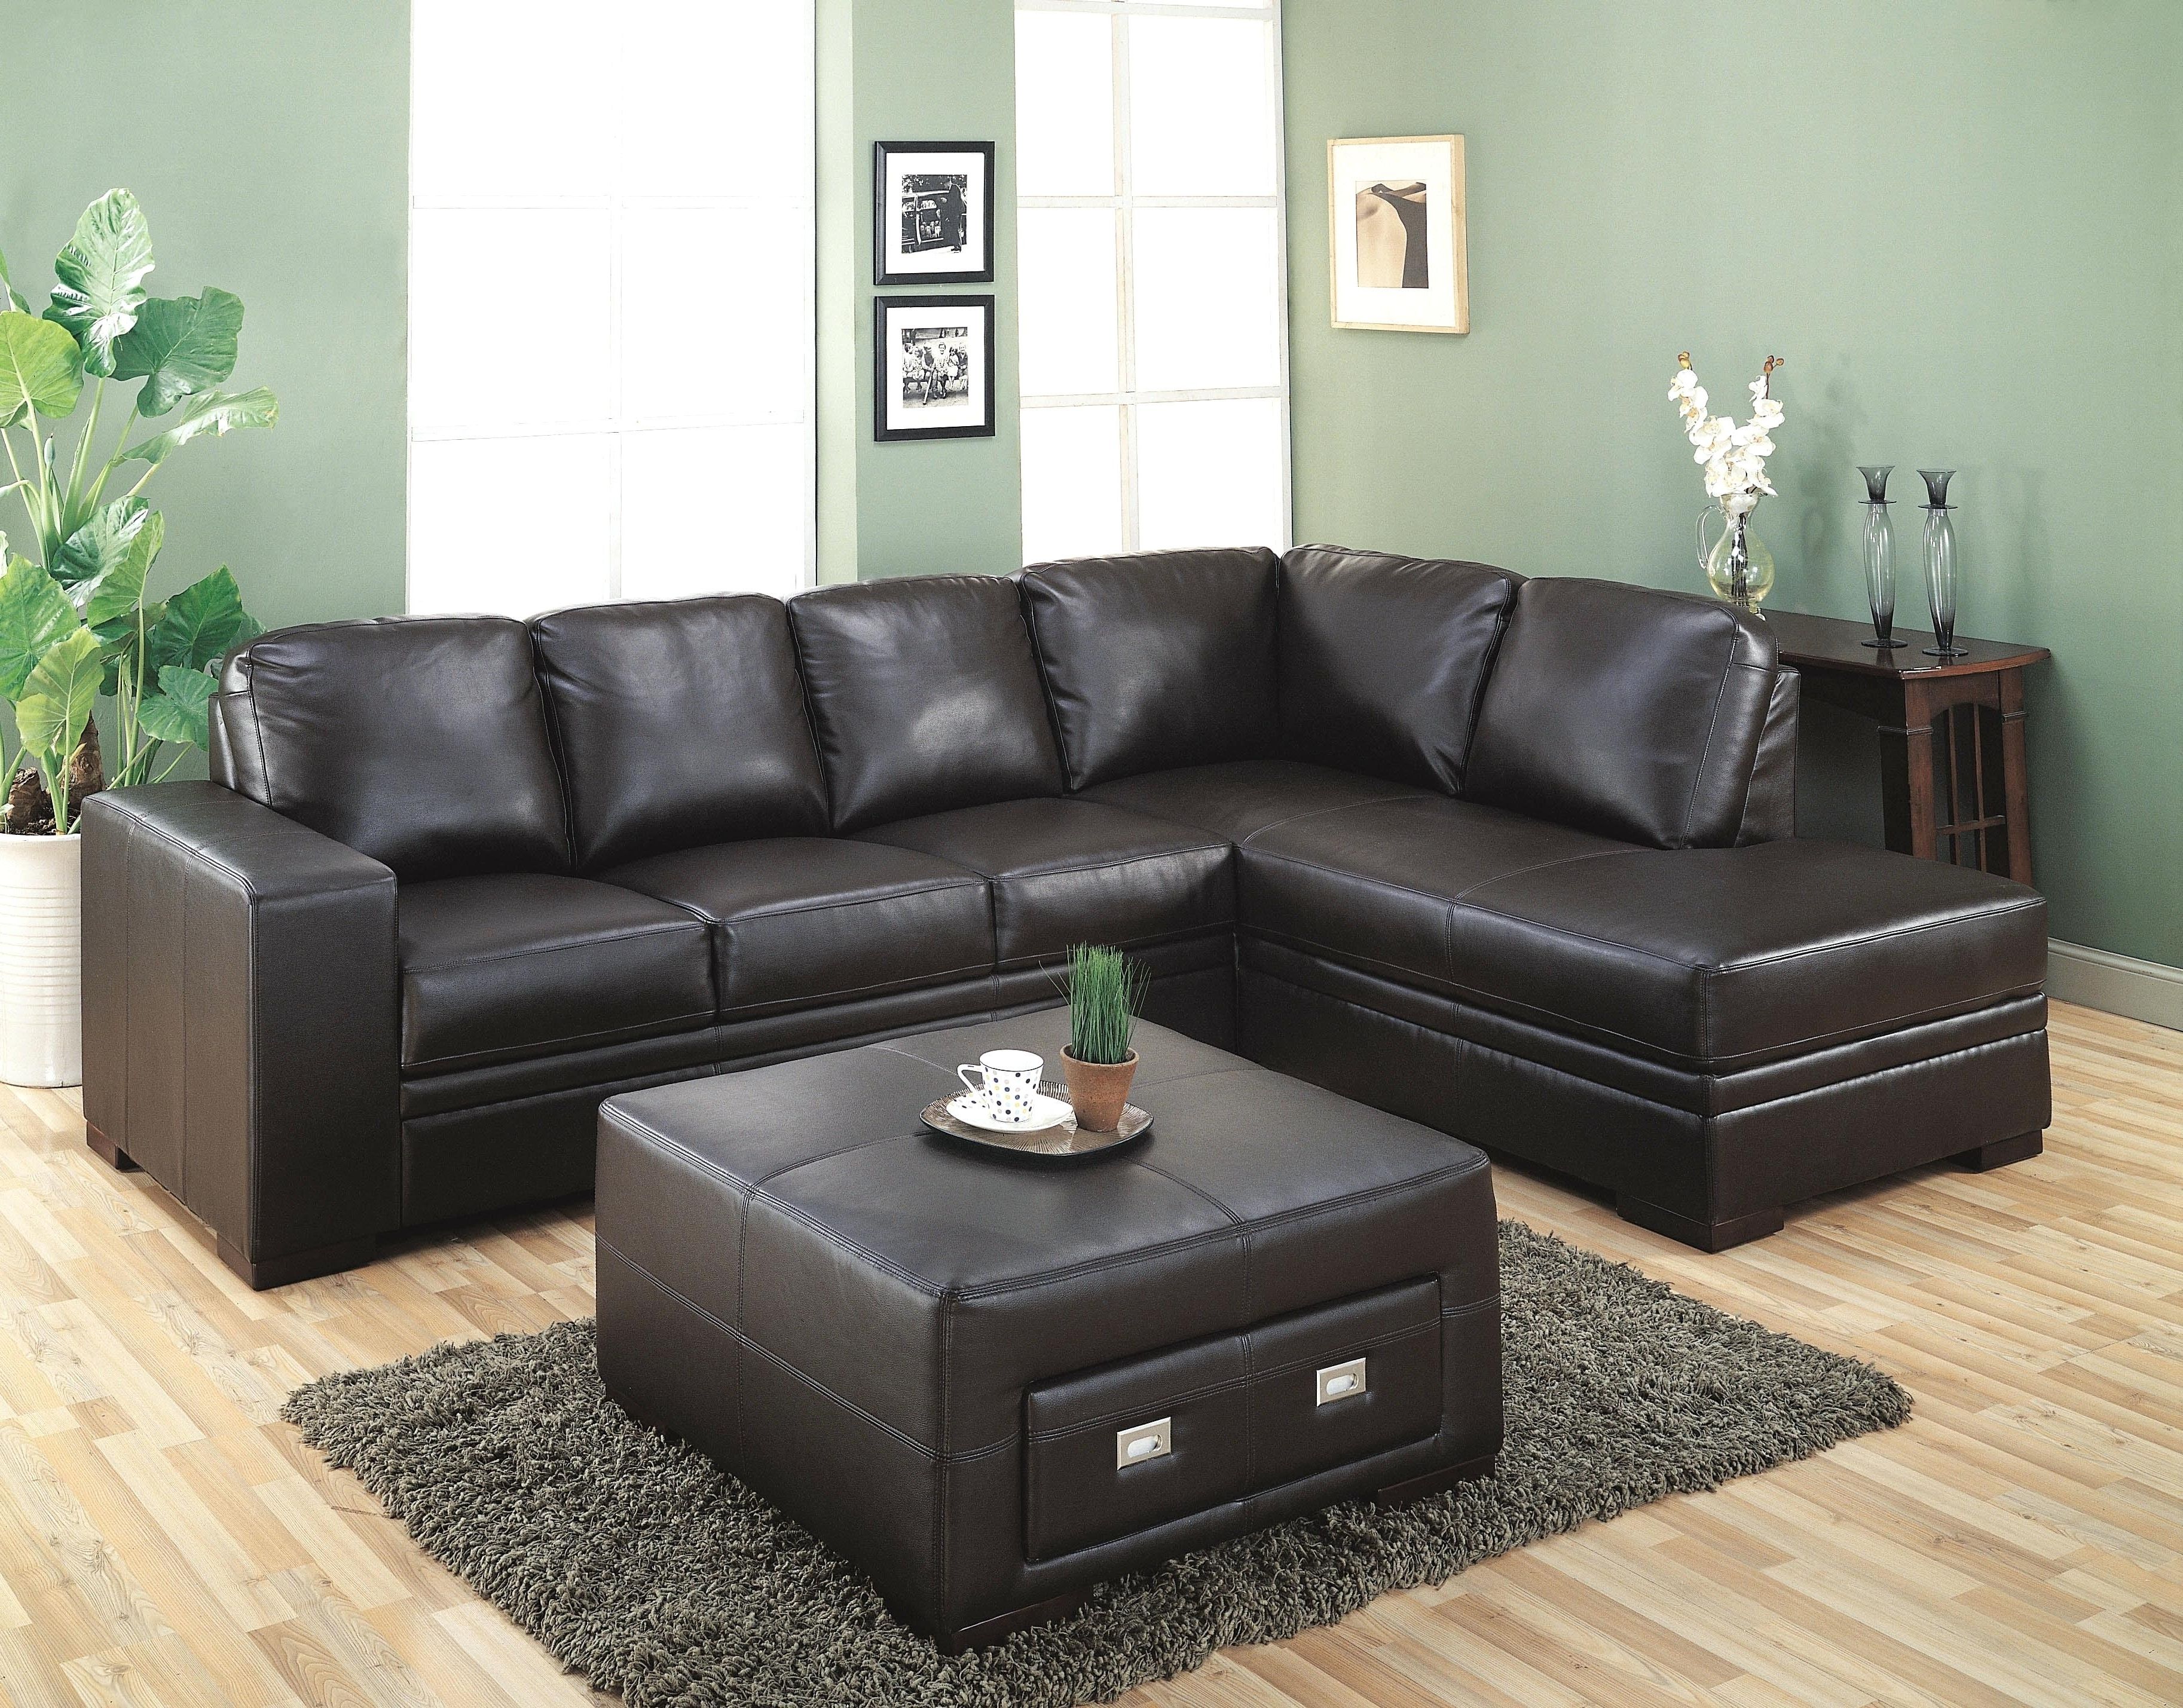 Most Recently Released Berkline Sectional Sofa Reviews Leather Sofas – Poikilothermia With Regard To Berkline Sectional Sofas (View 10 of 20)